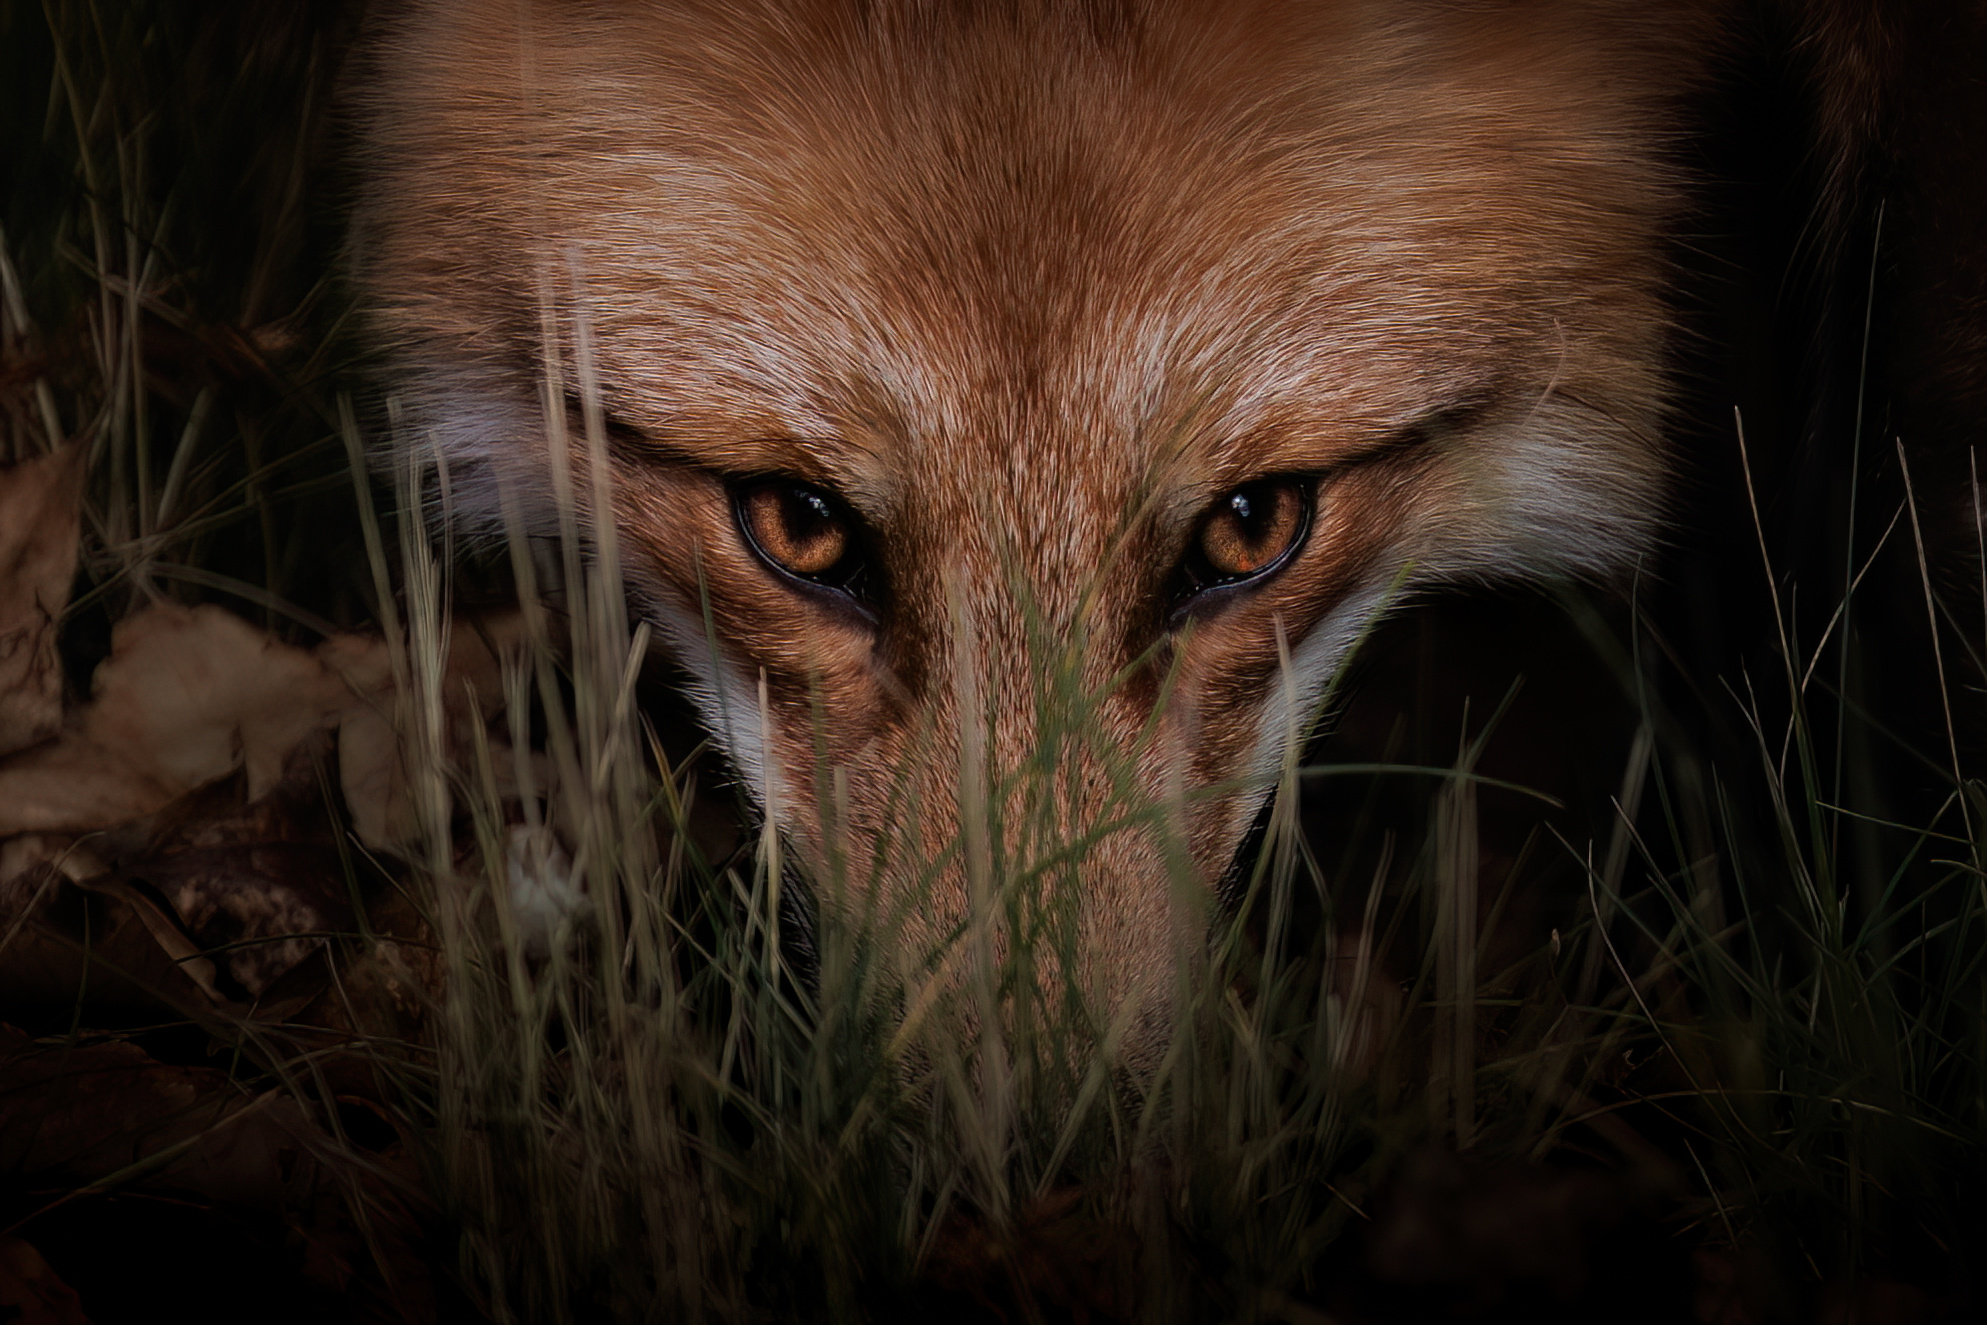 A red fox stares at the camera in Ontario Canada